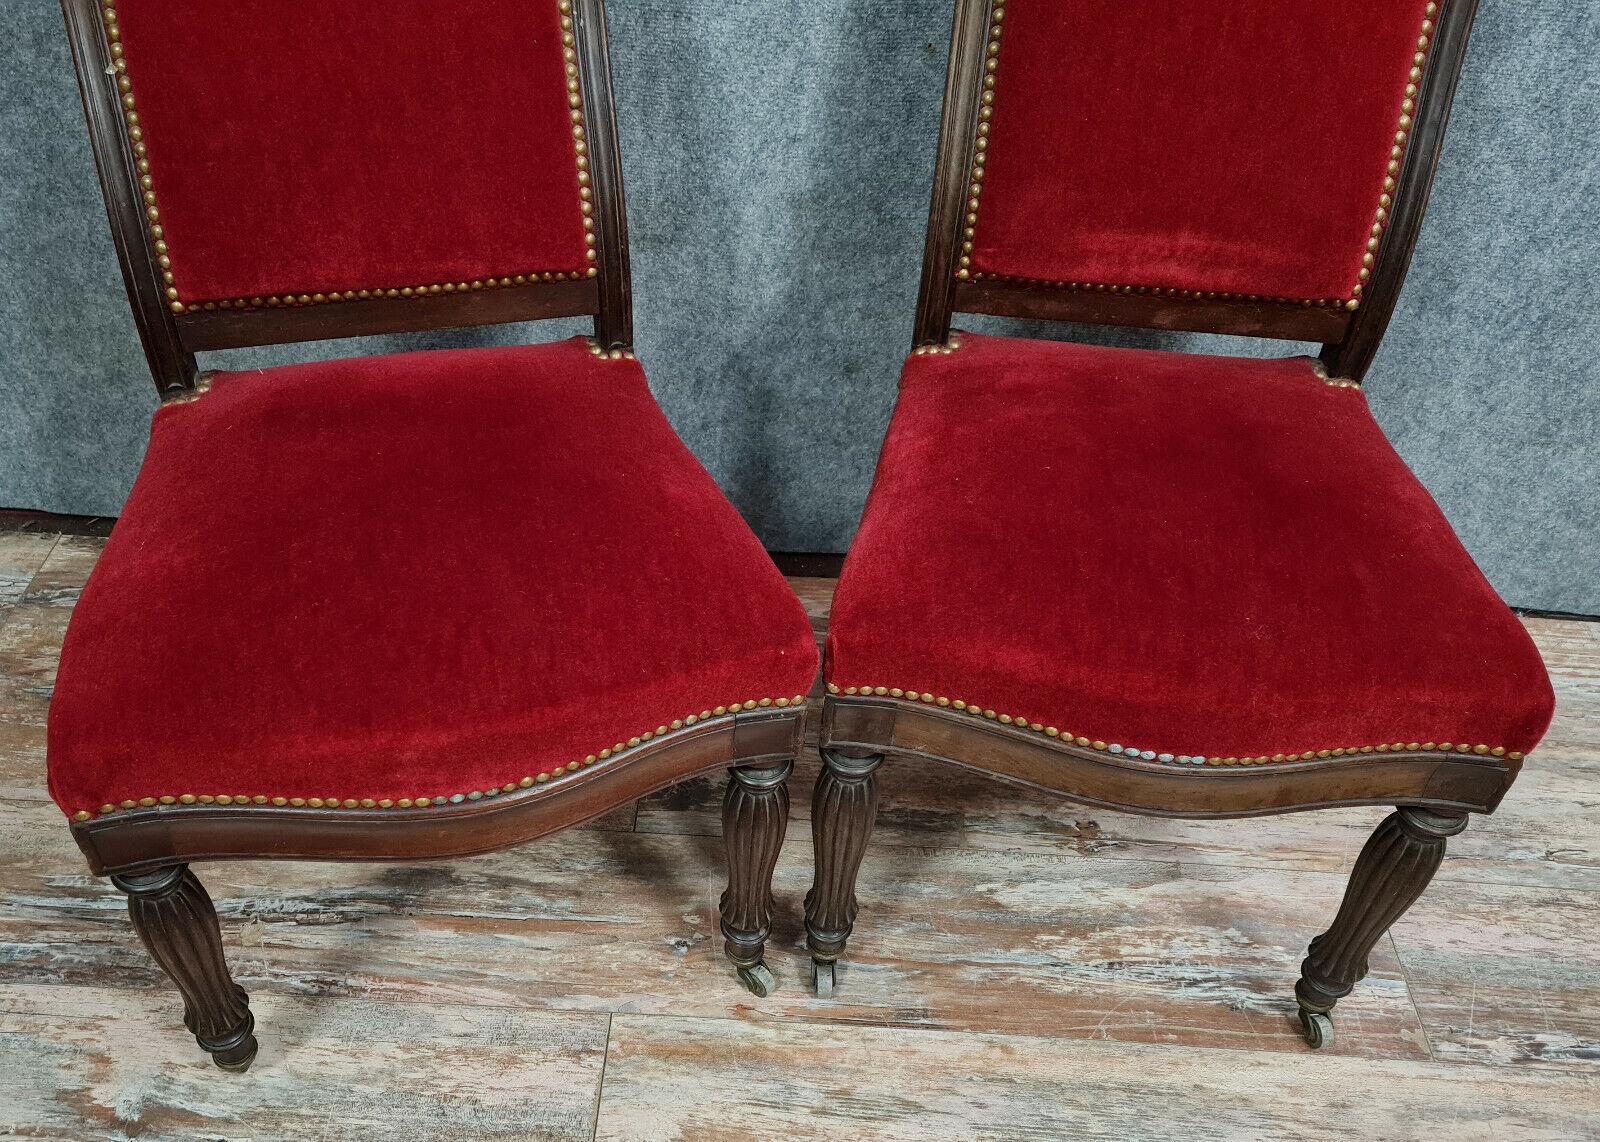 Exquisite Set of 4 Restauration Period Mahogany Chairs, circa 1820 -1X32 For Sale 6